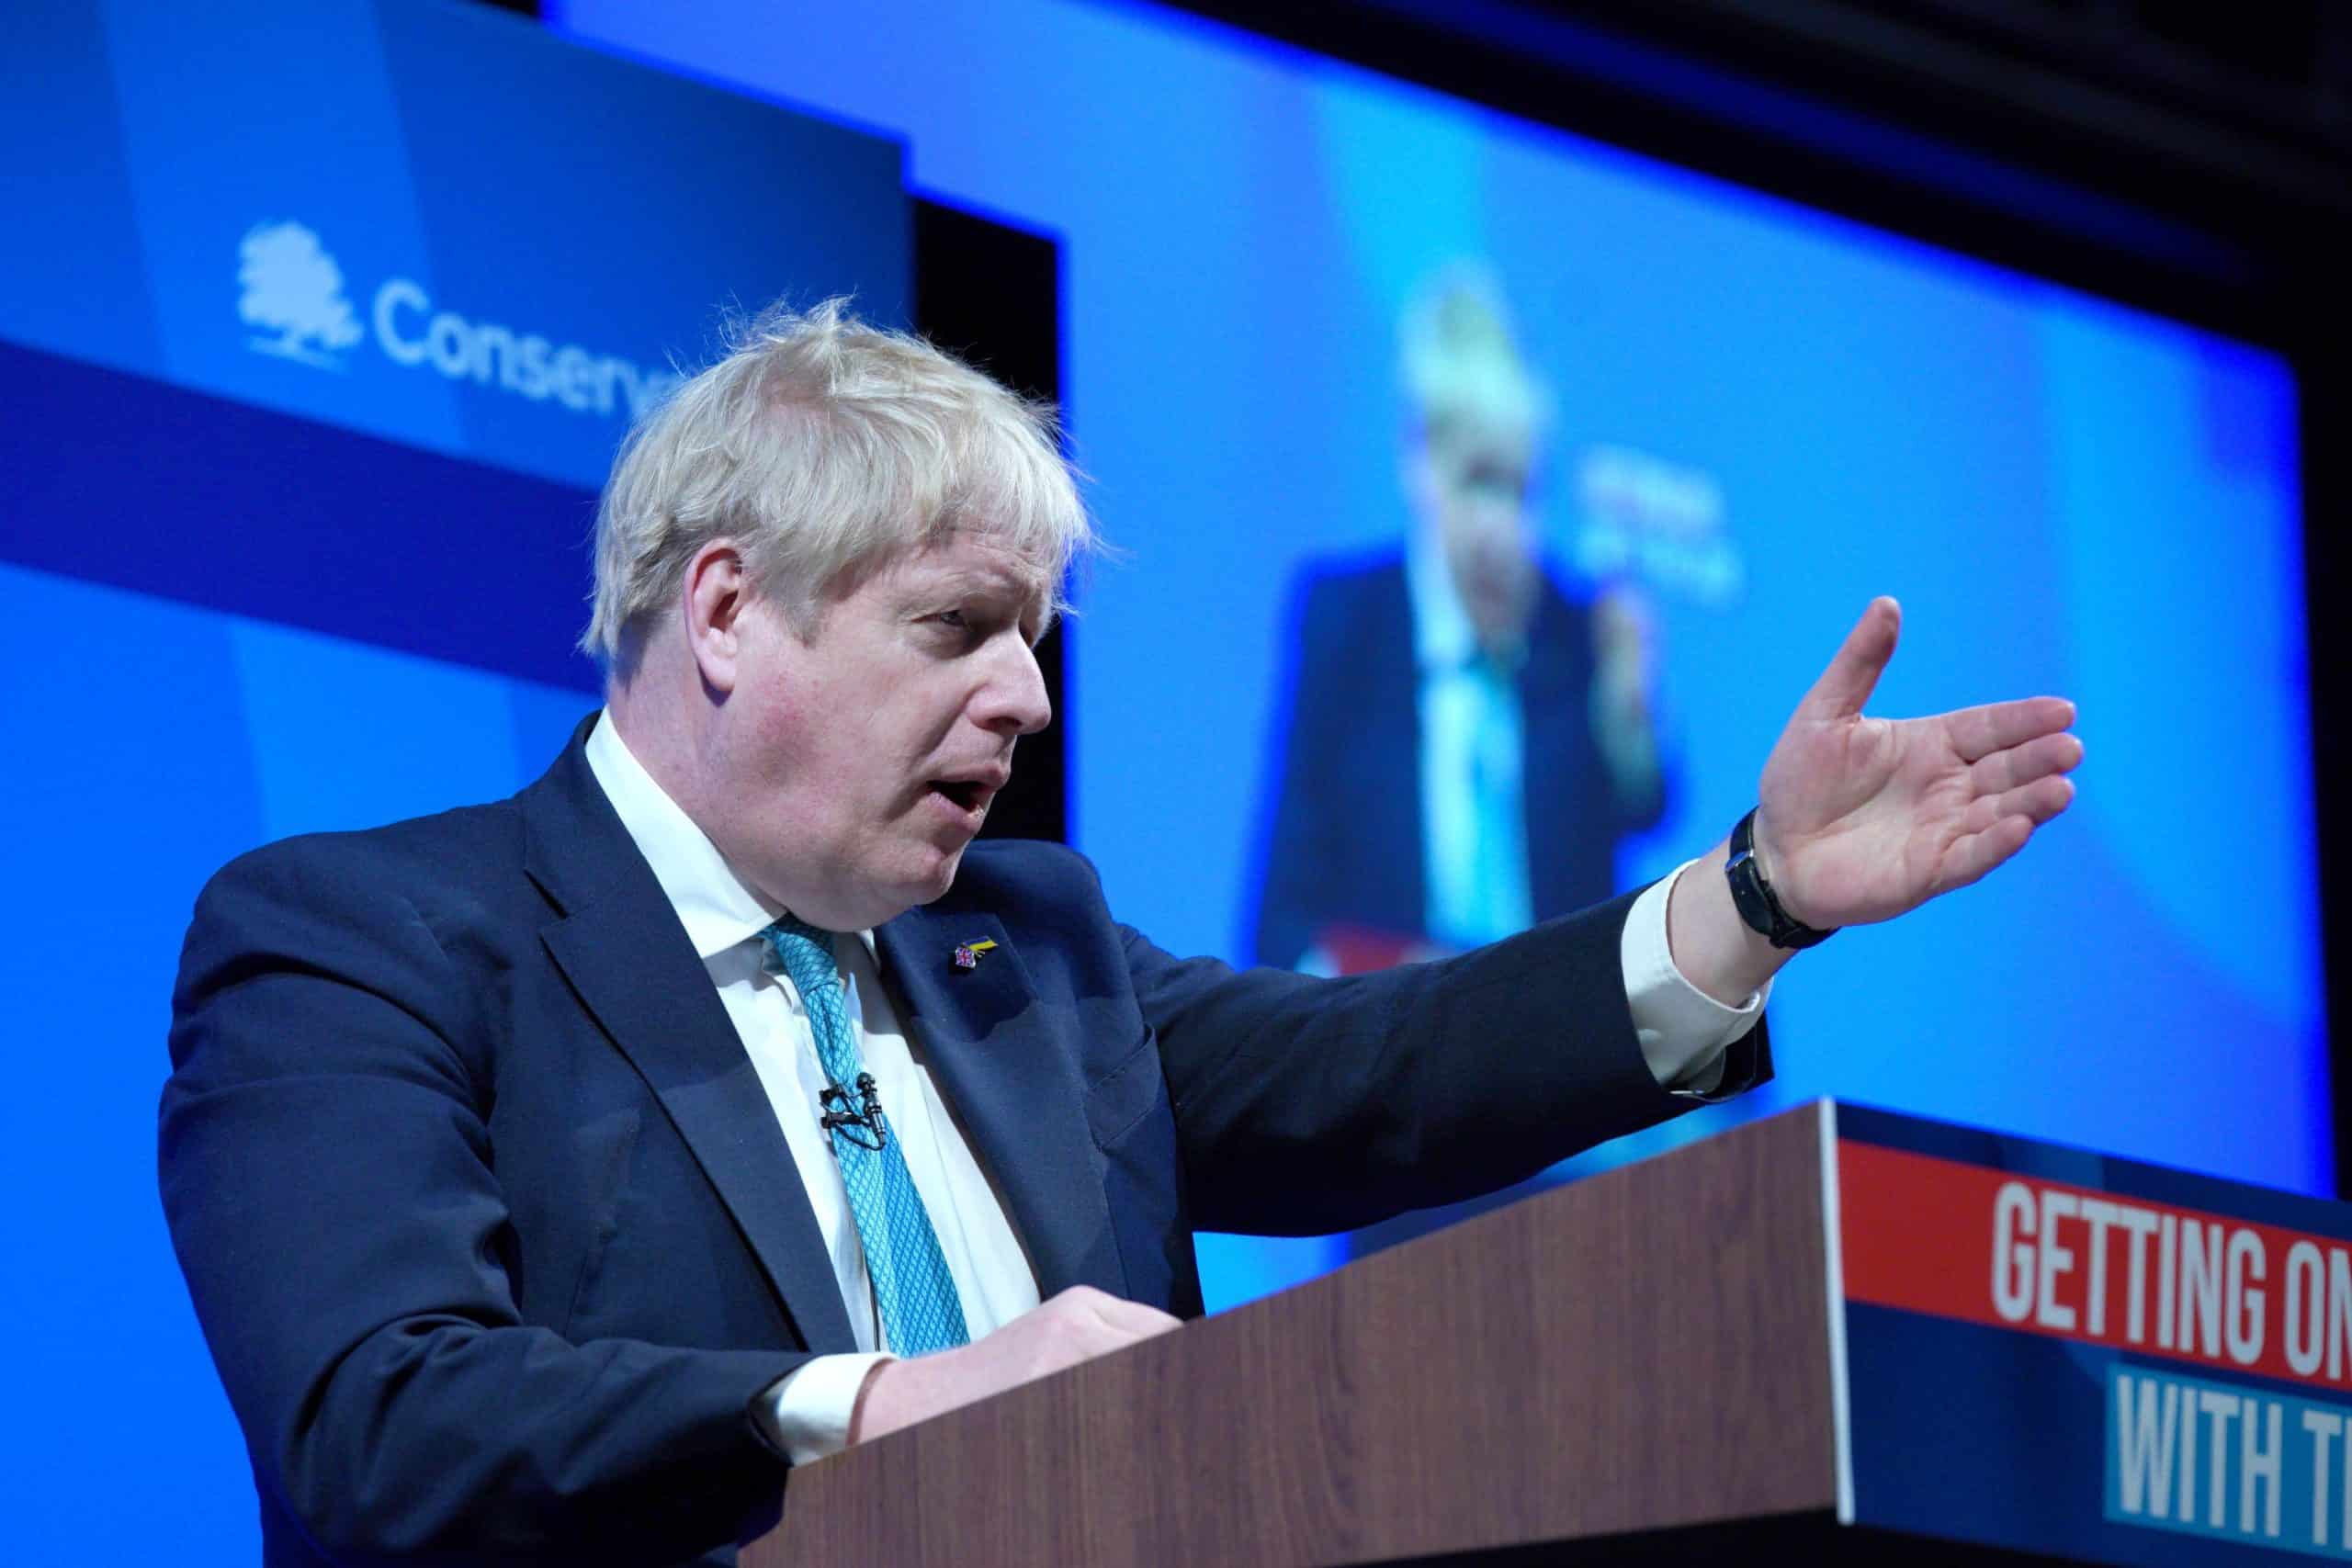 Reaction as Johnson compares Ukraine’s fight for freedom to Brexit vote